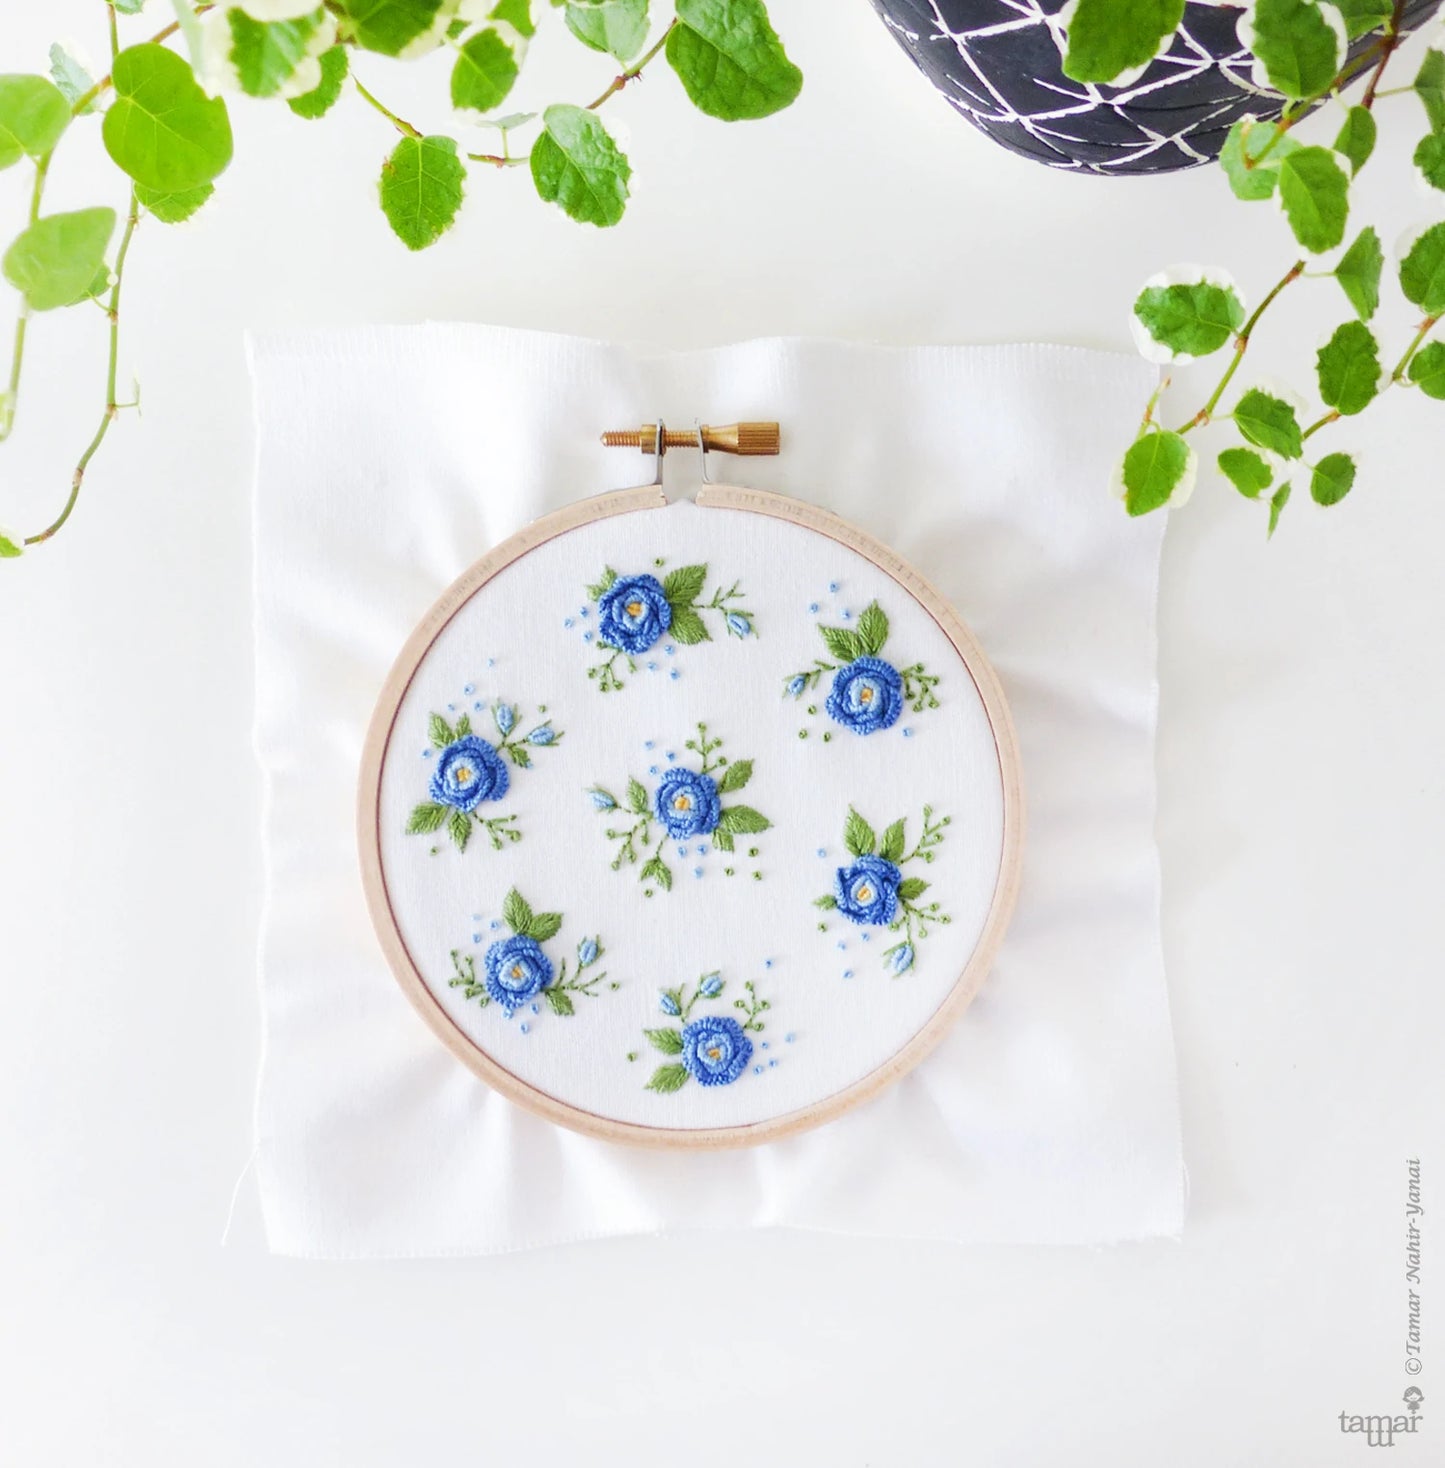 Blue Flowers embroidery kit